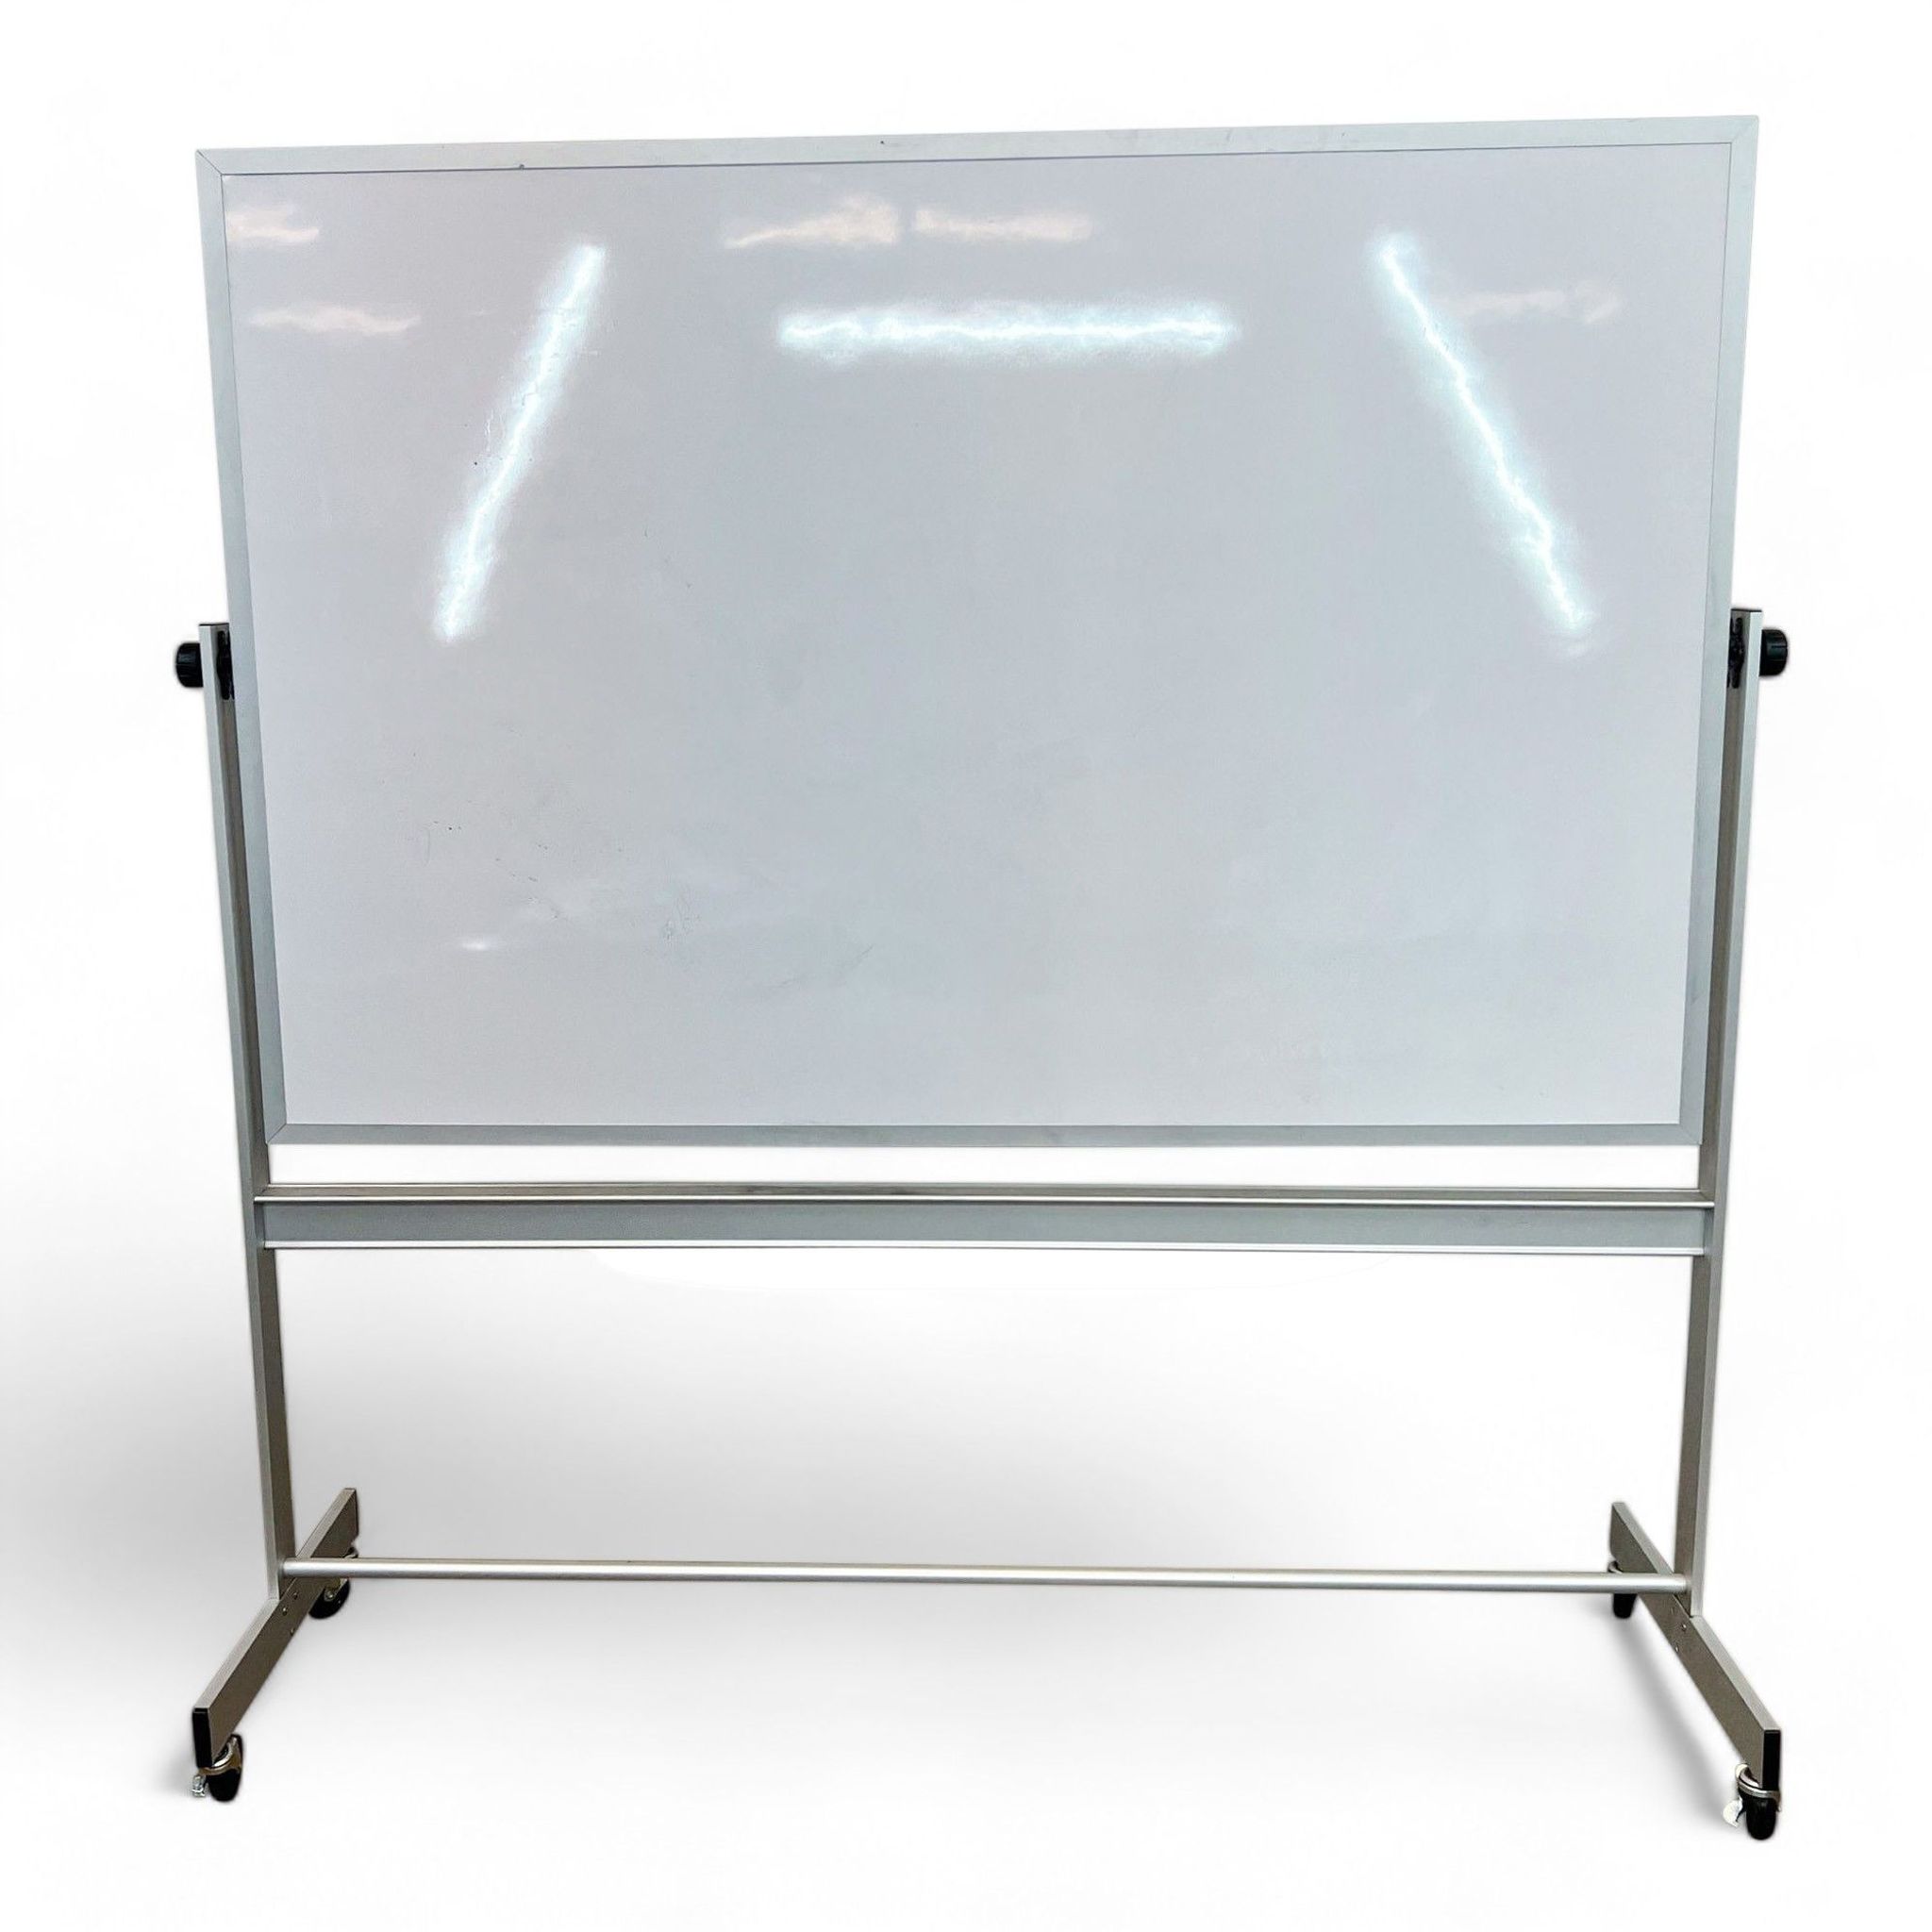 Reperch brand large magnetic whiteboard with a steel frame on wheels, shown in a clean, well-lit space.